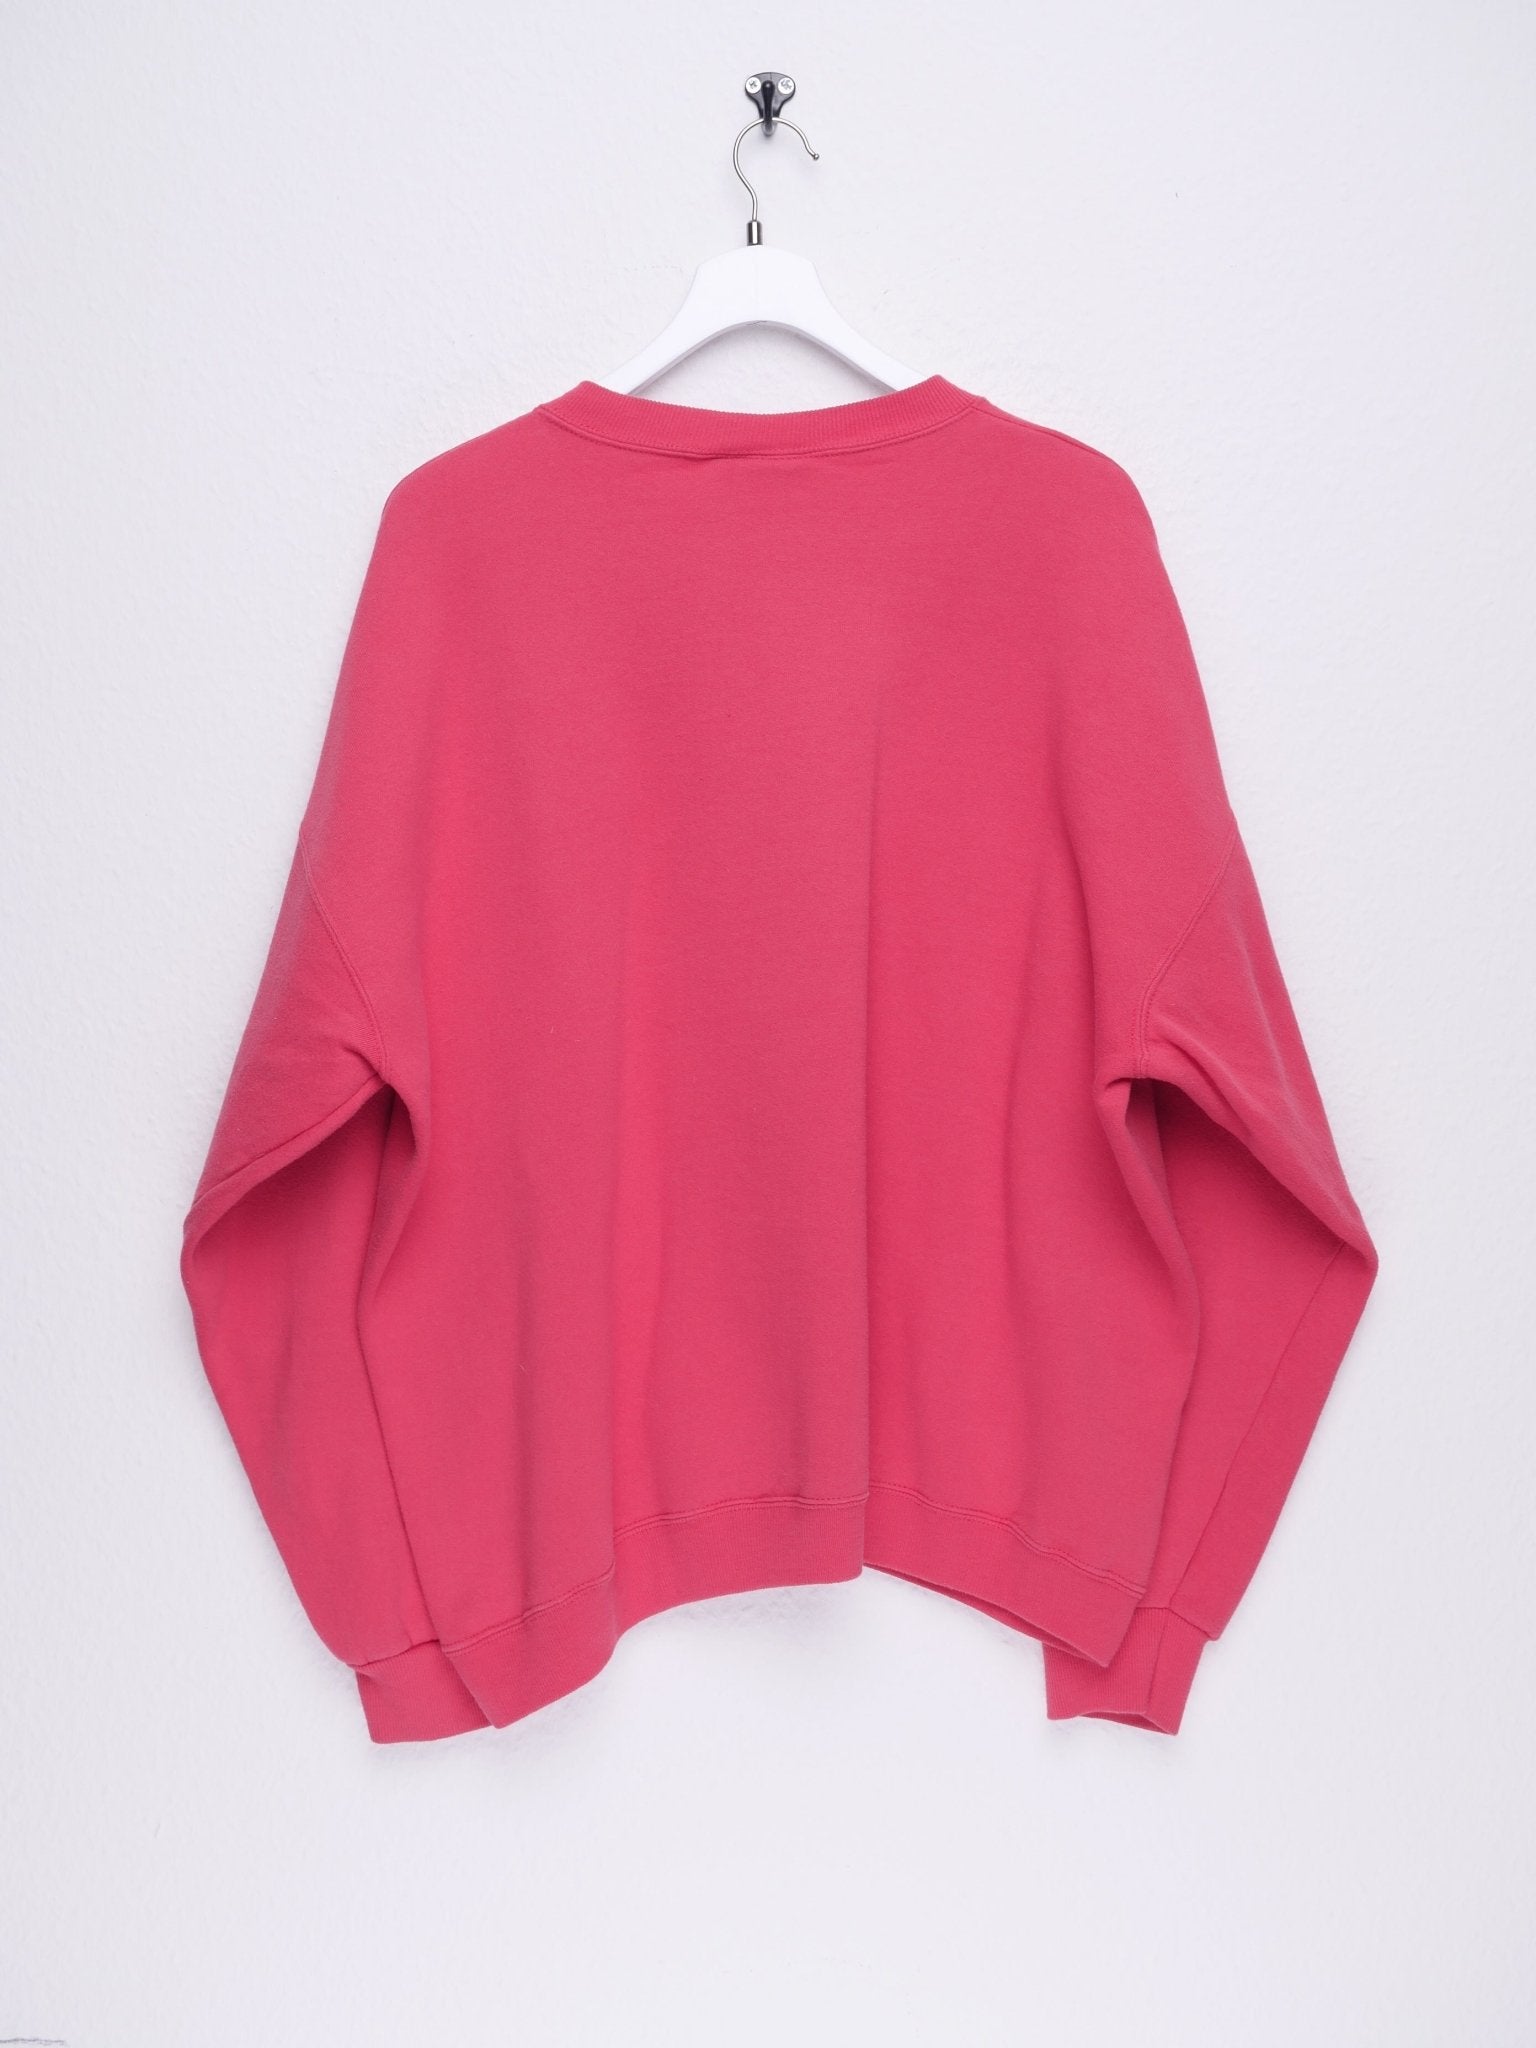 'Property' printed Spellout pink Sweater - Peeces